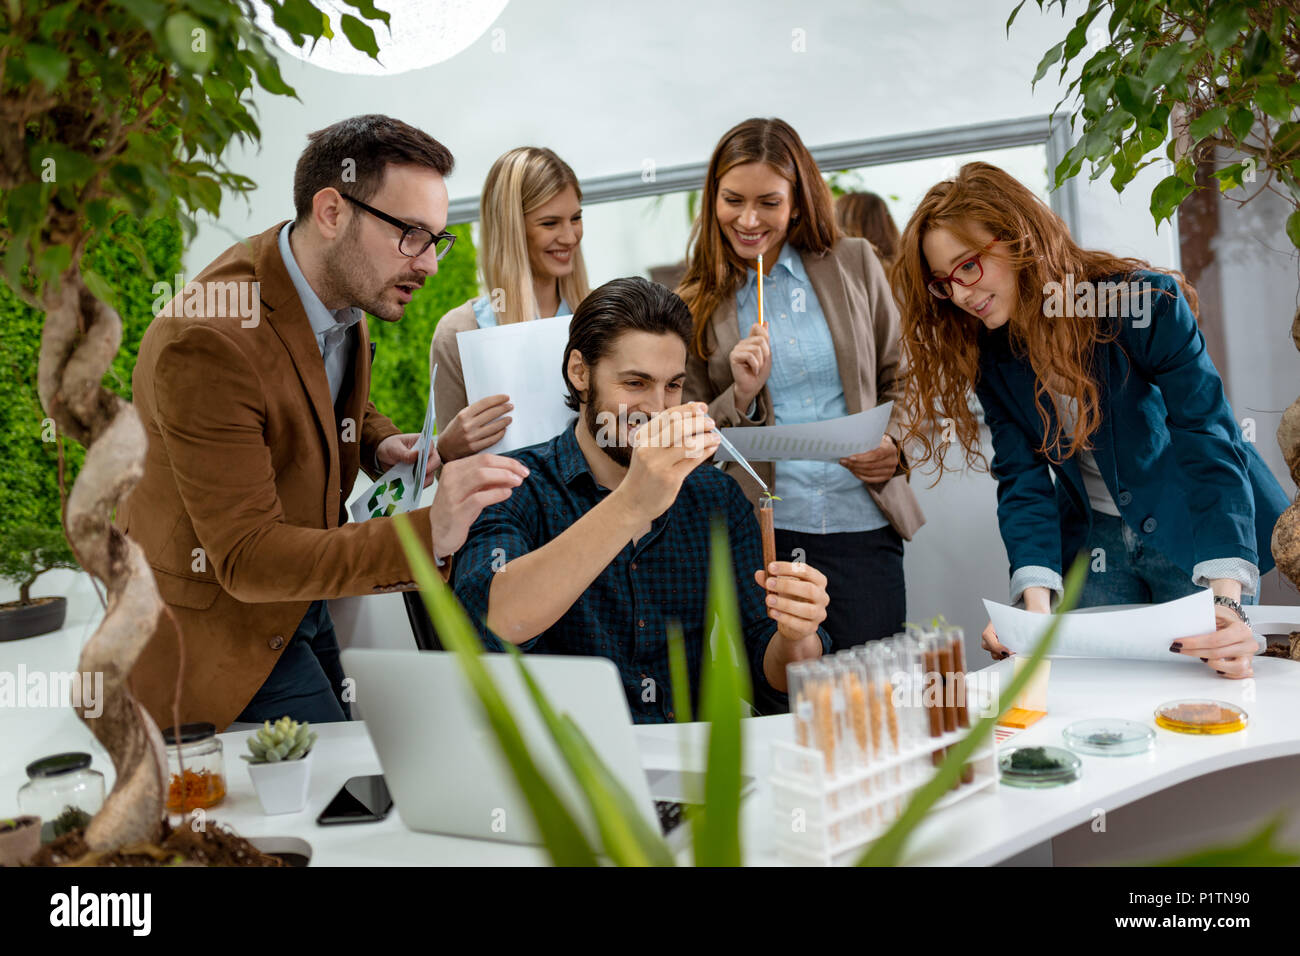 Team of university biologists  analysing the sample of plant in the test tube, watering it with drops of nutritious fluid. Stock Photo